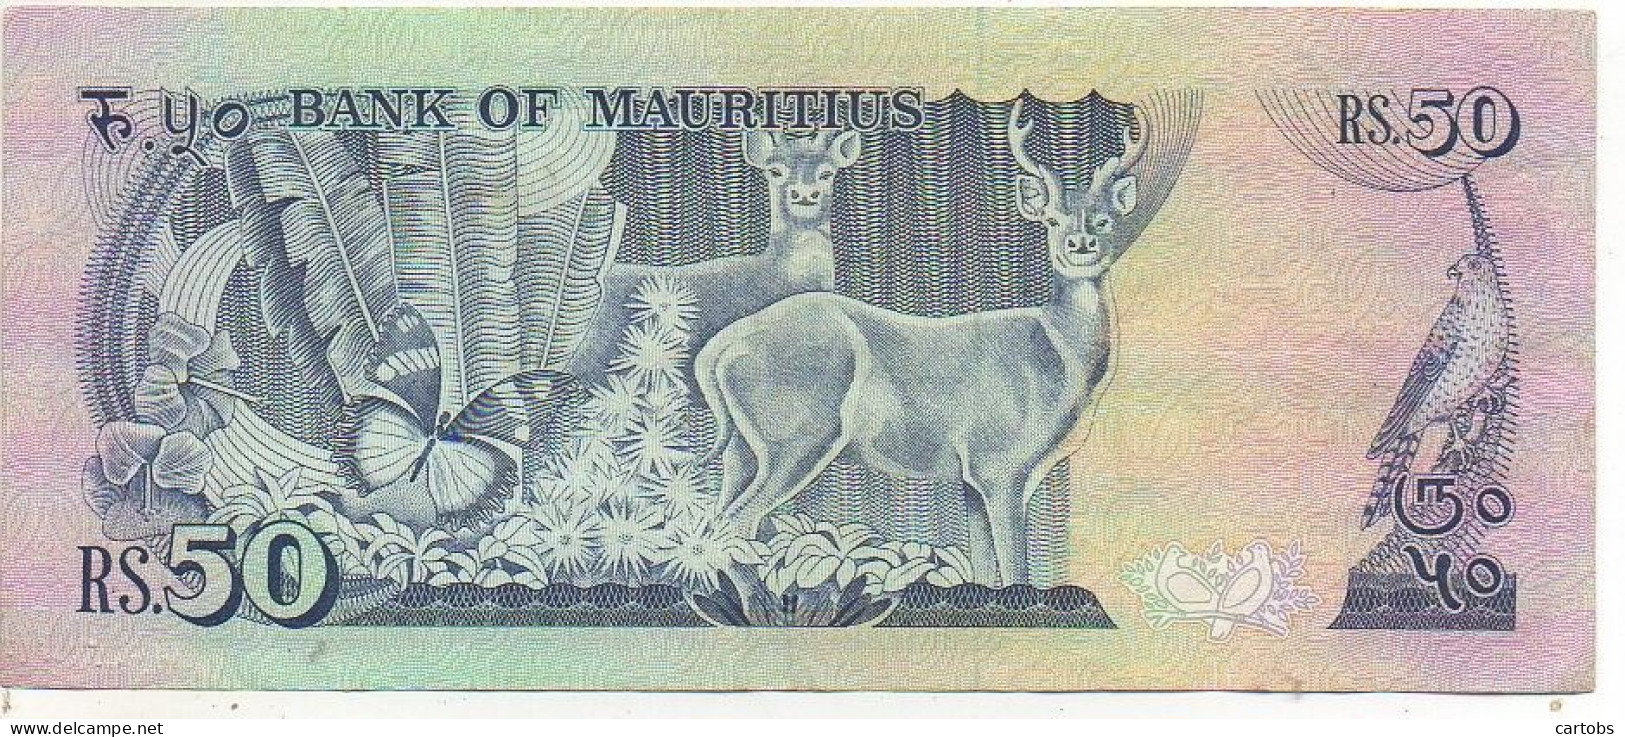 BANK Of MAURICIUS  50 Rupees - Mauritius